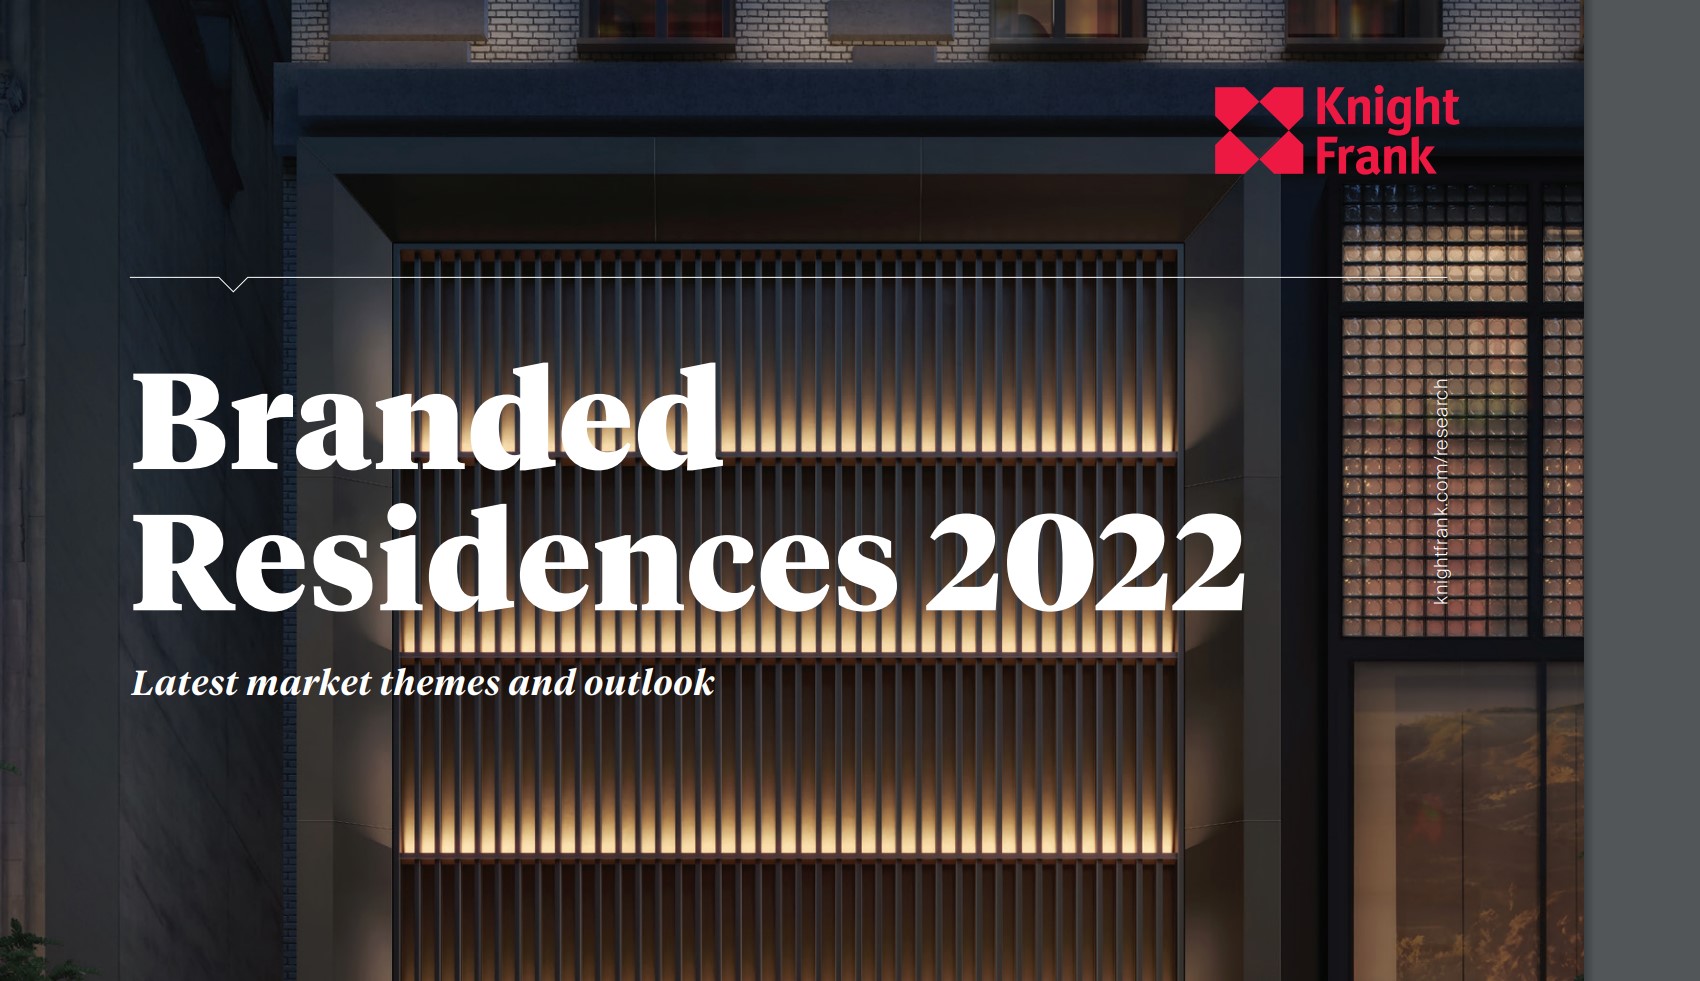 Knight Frank publishes its ‘Branded Residences 2022’ report